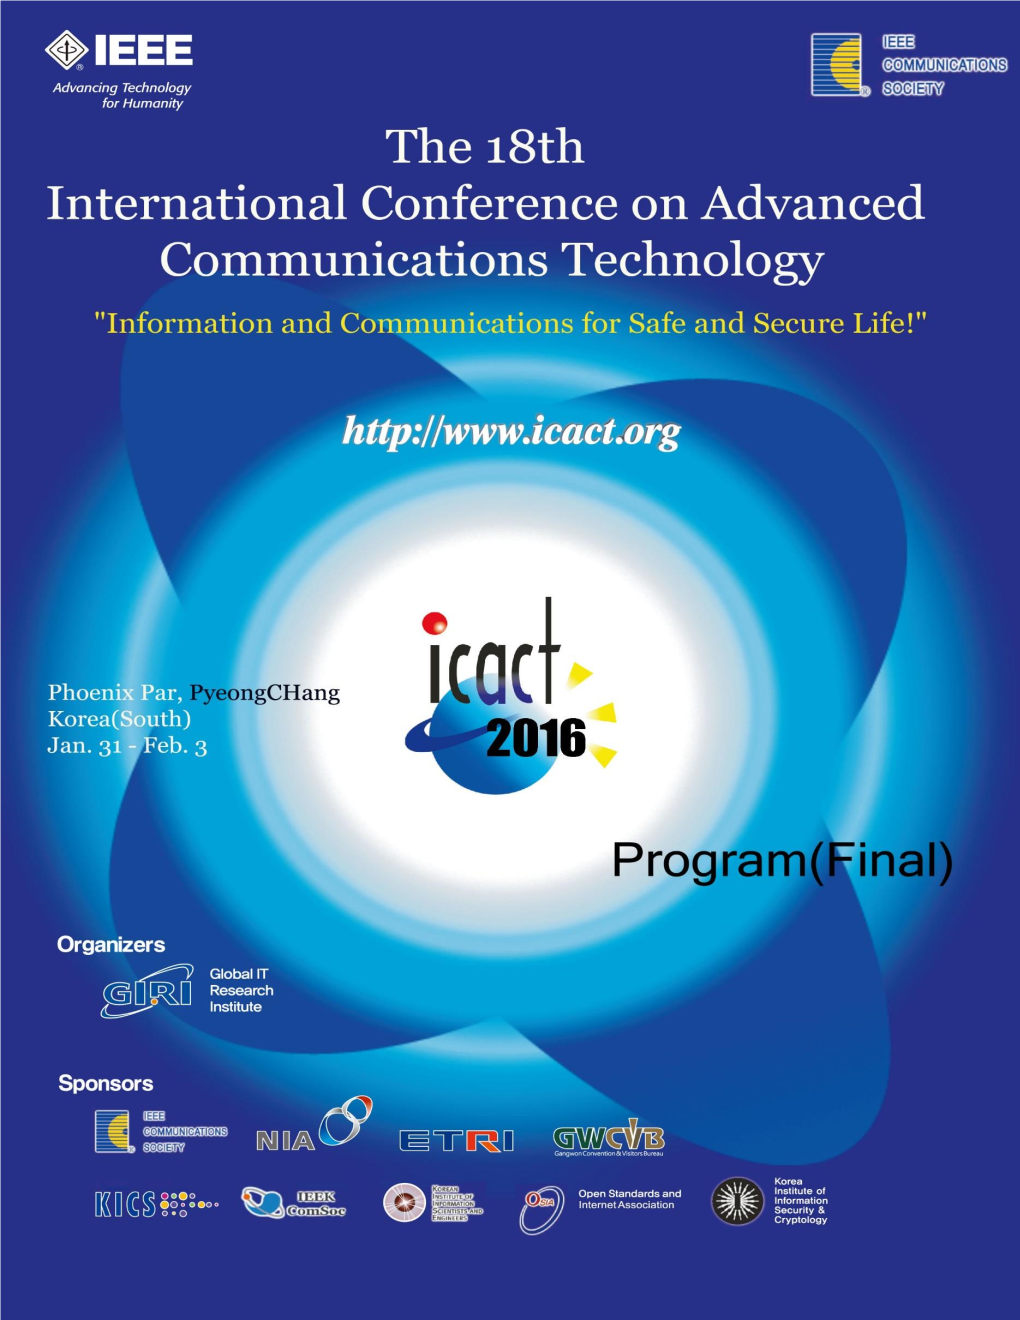 THE IEEE 18Th INTERNATIONAL CONFERENCE on ADVANCED COMMUNICATIONS TECHNOLOGY "Information and Communications for Safe and Secure Life!"